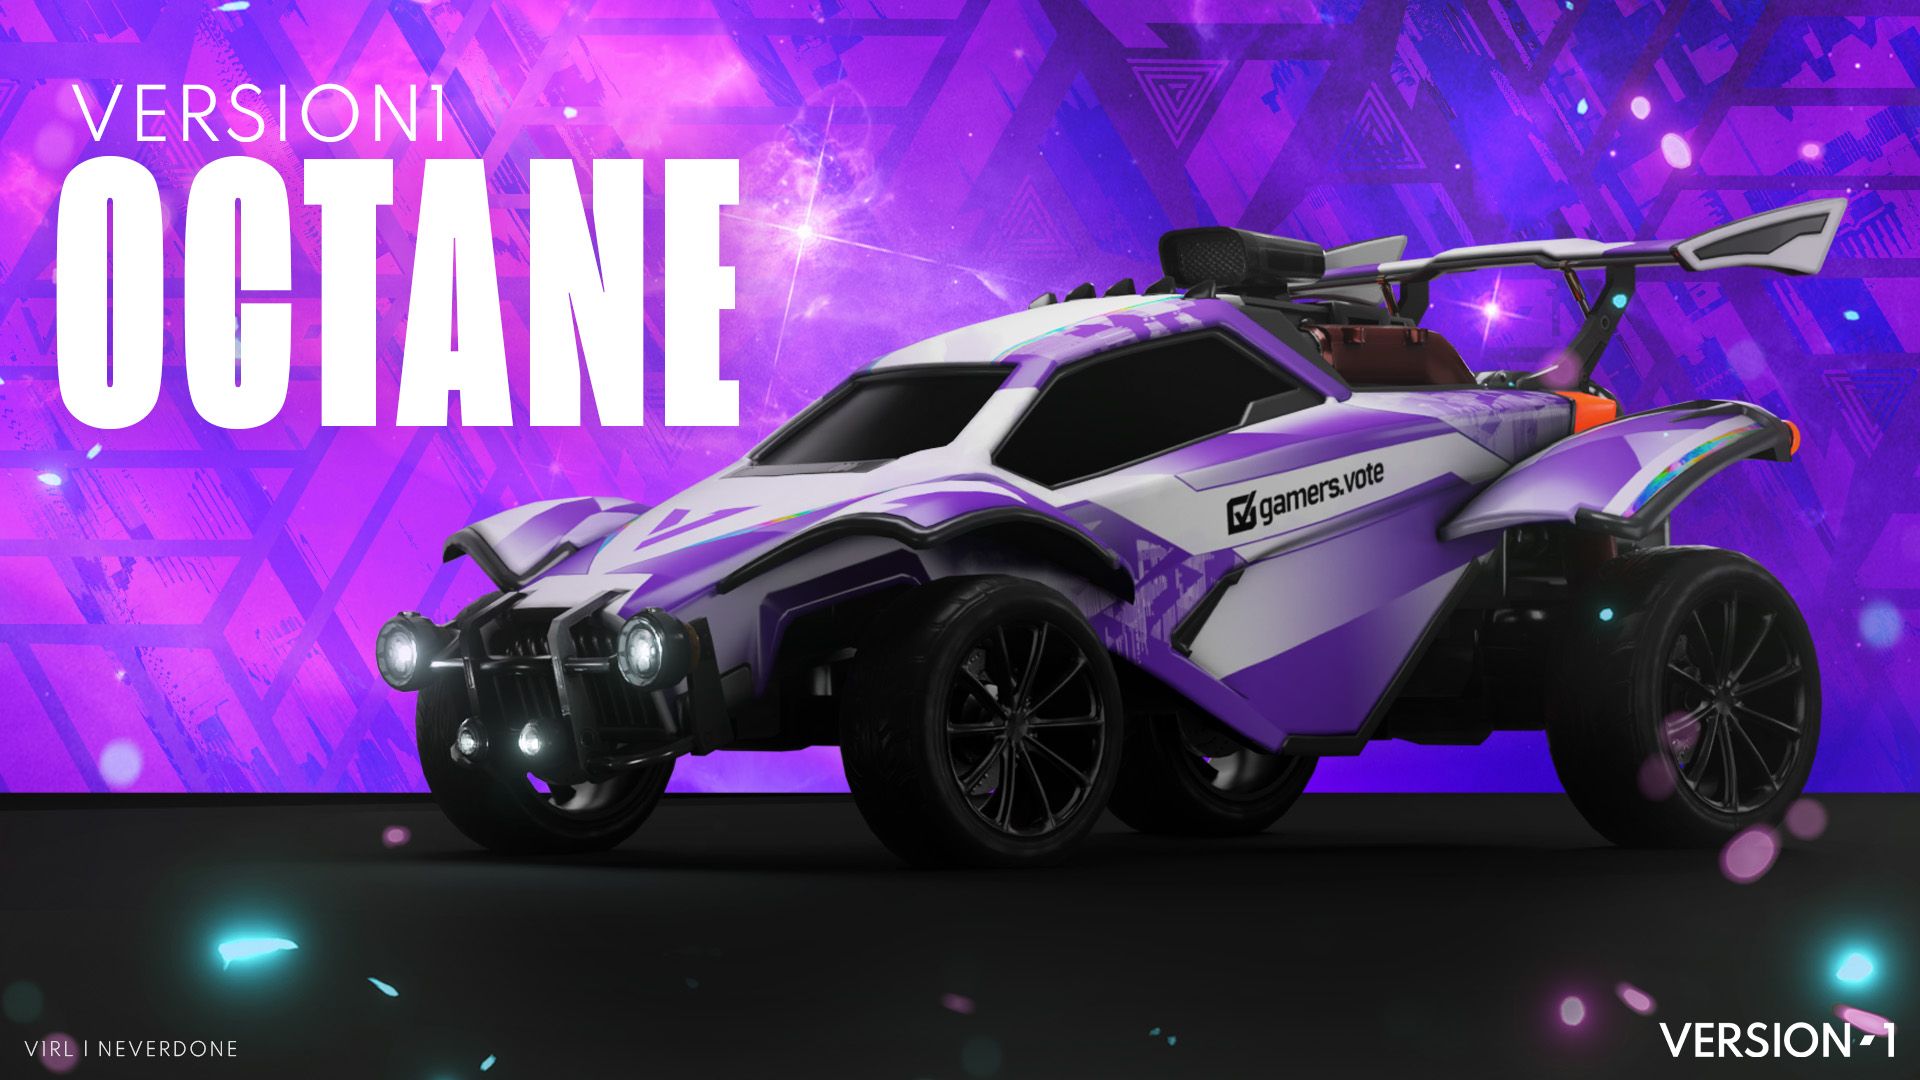 Octane car equipped with the Away version of theVersion1 Rocket League decals